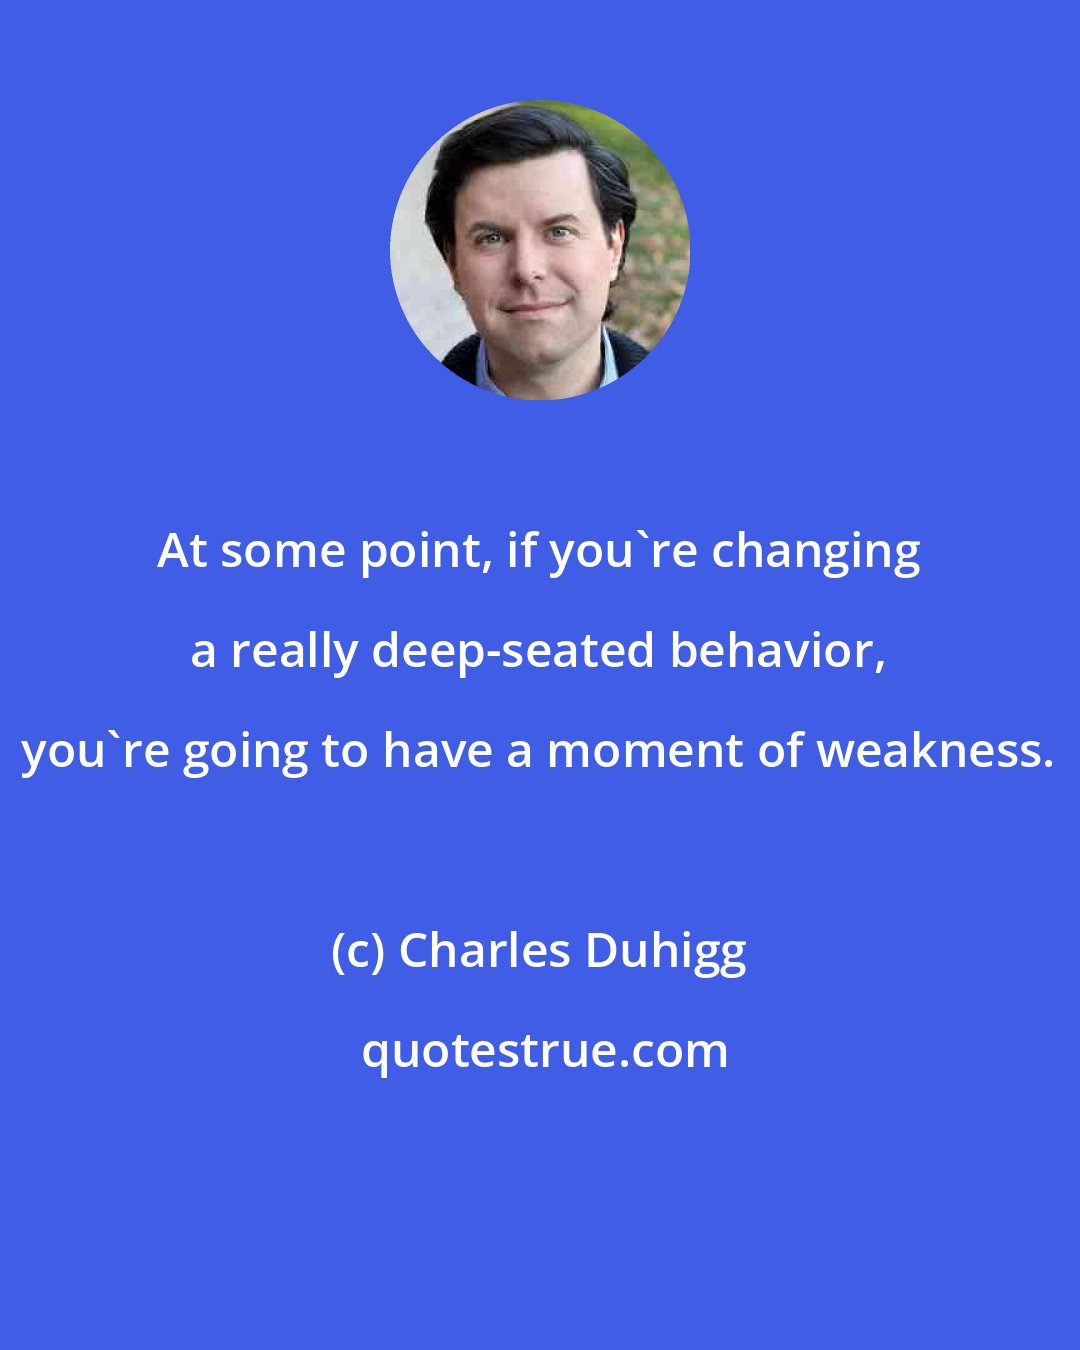 Charles Duhigg: At some point, if you're changing a really deep-seated behavior, you're going to have a moment of weakness.